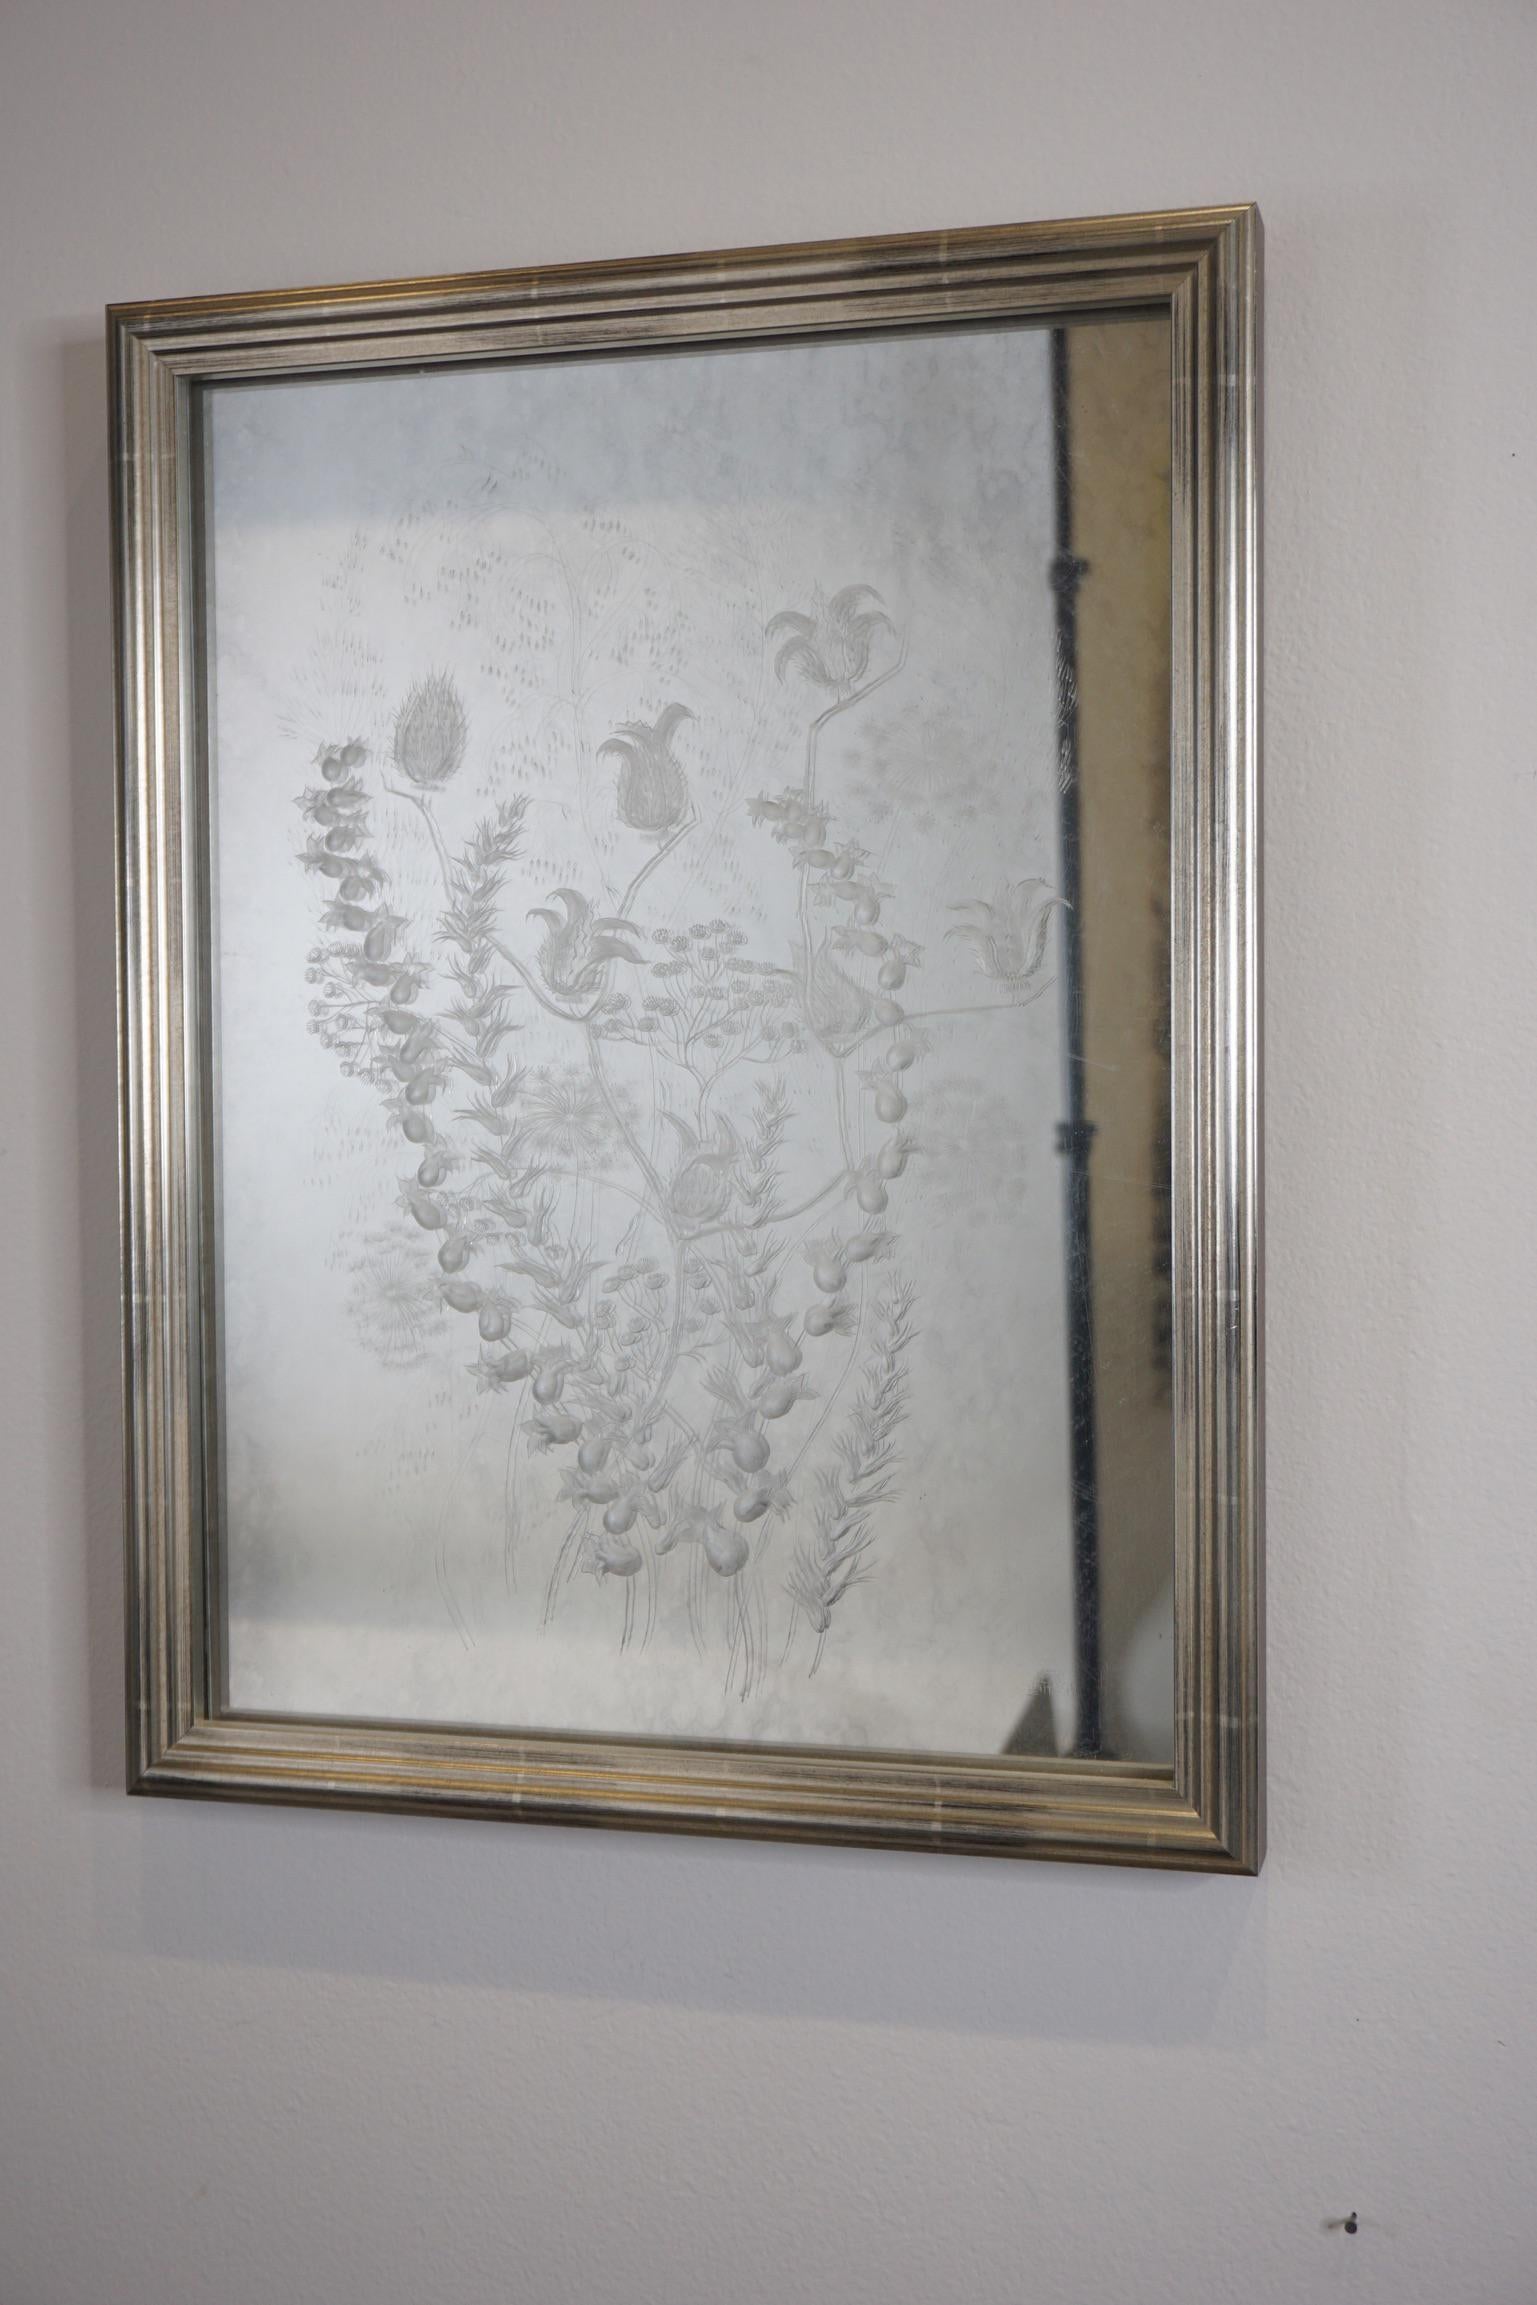 1920's etched Lucite botanical panels found at an estate sale were backed with antiqued mirror and frame to elevate the beauty of the hand-etching. These beauties were the star of the show in the Potting Room at the Hamptons Showhouse.